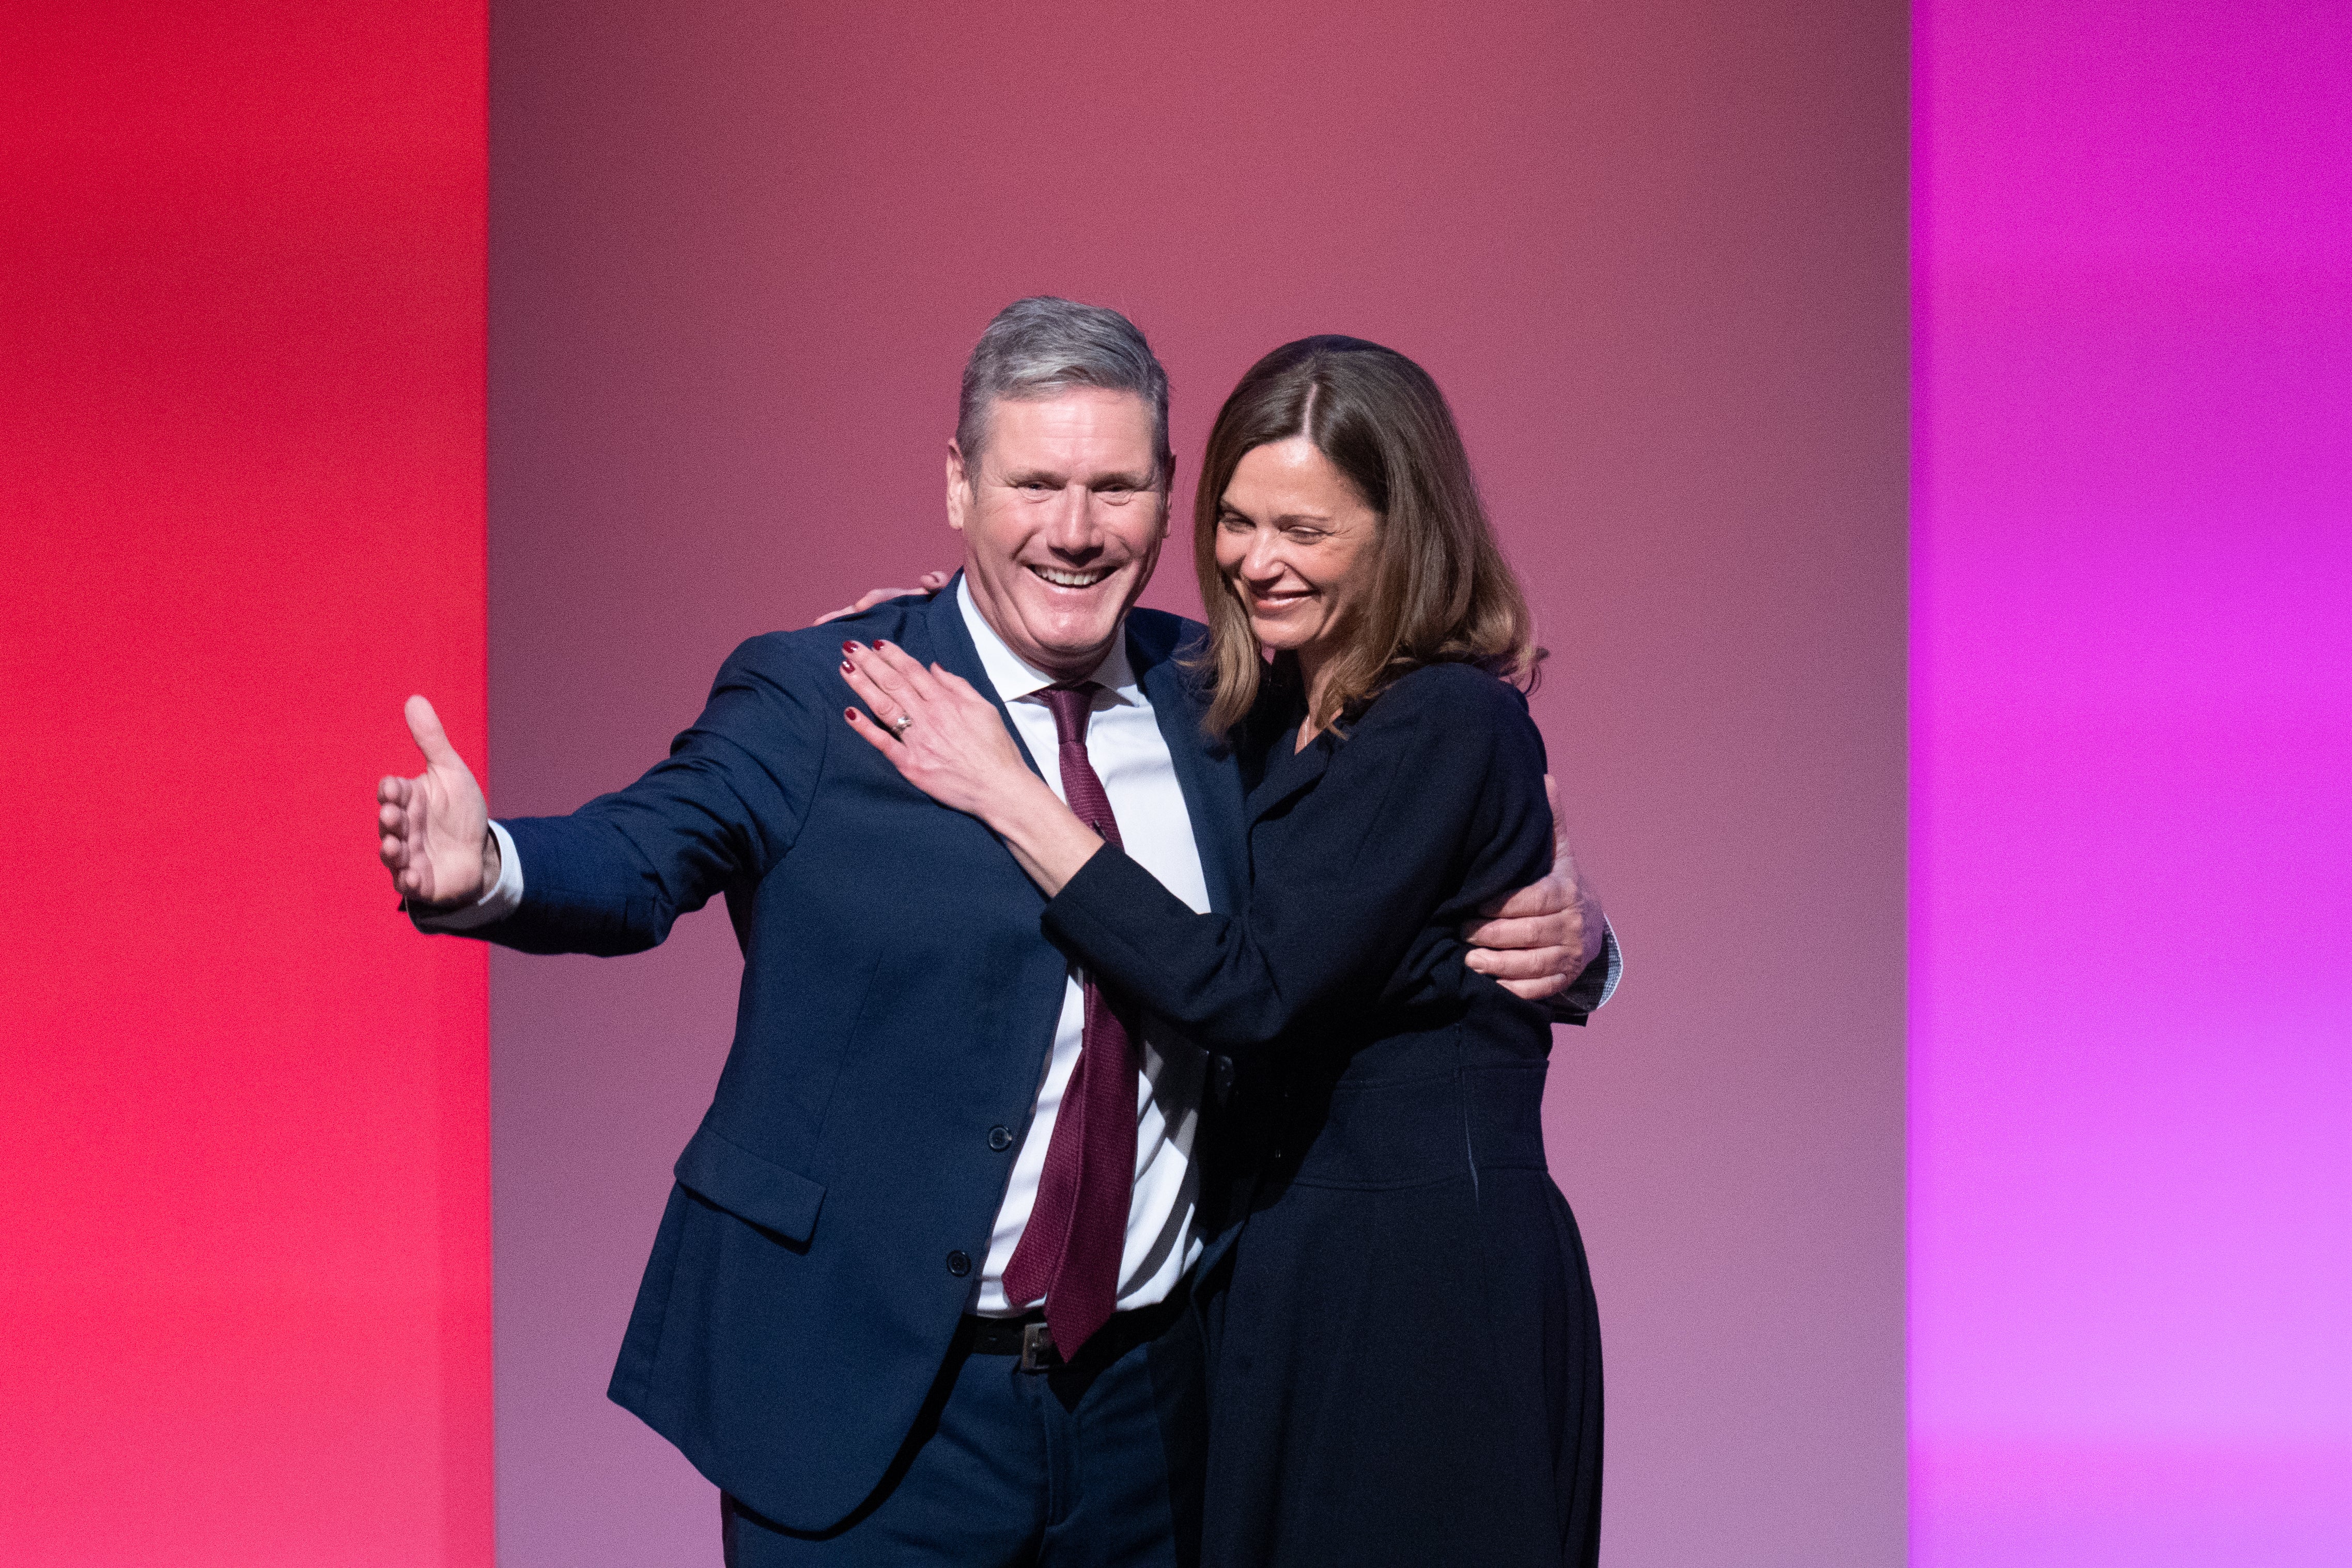 Labour leader Sir Keir Starmer is joined by his wife Victoria on stage after delivering his keynote speech to the Labour Party conference in Brighton (Stefan Rousseau/PA)